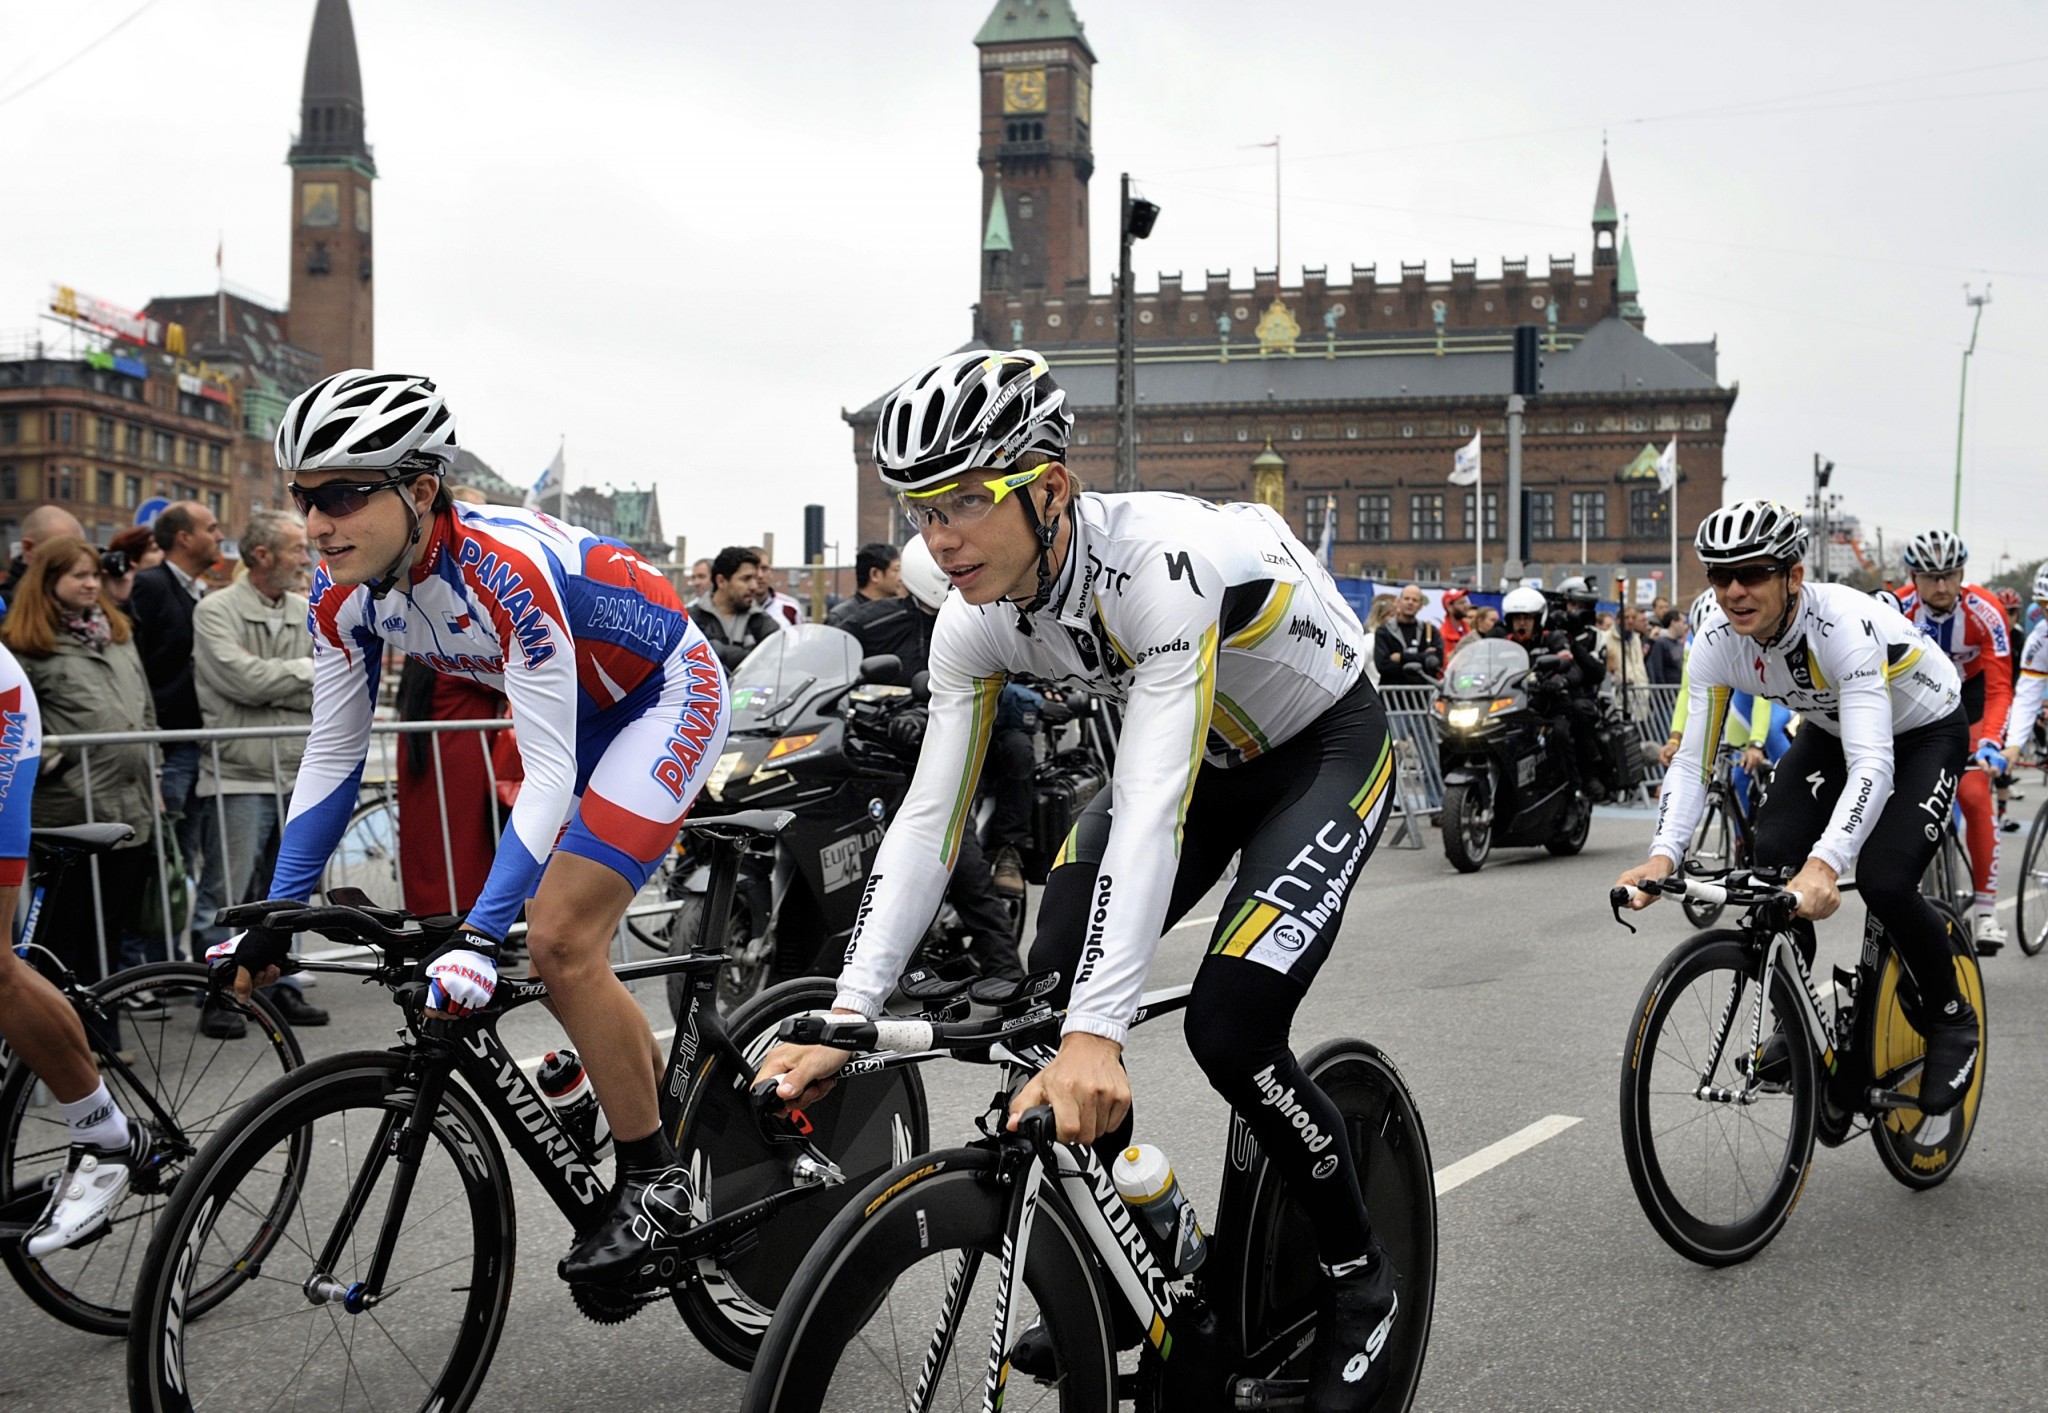 Copenhagen last hosted the UCI Road World Championships in 2011 ©Getty Images